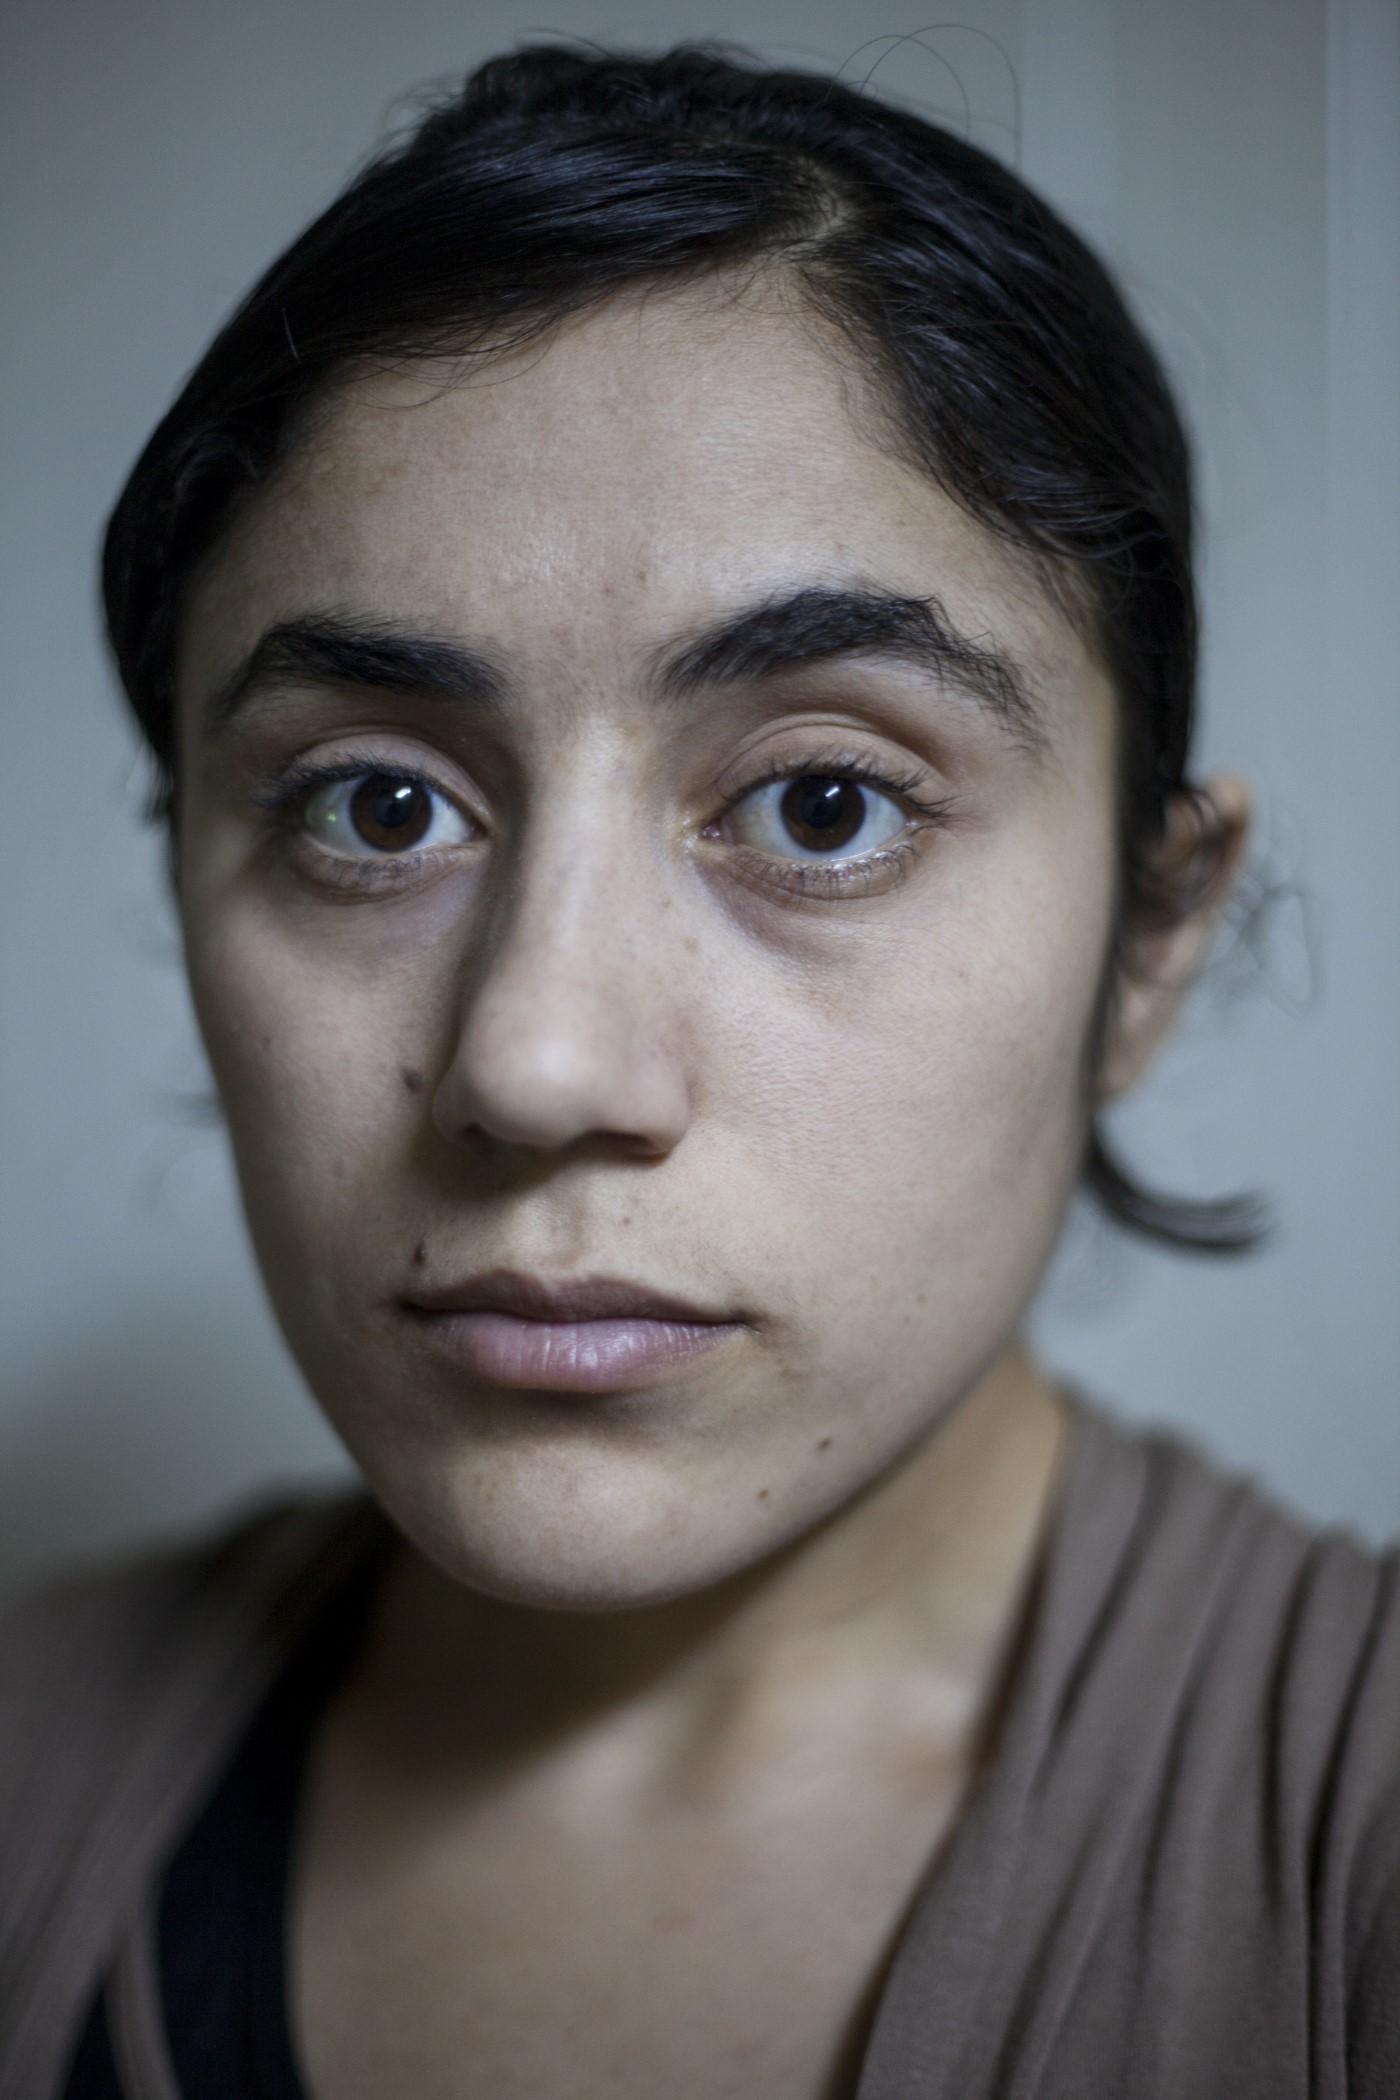 Bafrin Shivan. Yazidi Woman (19). Bafrin was kidnapped on the day Daesh occupied Shangal (Iraq) in 2014. She was a16 year-old virgin. Several men from her family were murdered: two brothers, three cousins and two uncles. Bafrin was taken with other women to buildings controlled by Daesh before being sold to a member of the Islamic State. Their daily food intake was a piece of bread or tomato. She explains that they would be given drinks mixed with drugs to control them. Later on, in Mosul, she would be confined with another 200 women in a crowded space with no room to move. In that same place, Daesh leaders would select and take them to their private homes. When bought for the first time, she would witness her friend and fellow prisoner commiting suicide. Bafrin would be sold three times, forced to marry an IS member, and convert to Islam. The man she was forced to marry self-immolated. 4 months later, in 2016, she would manage to escape. A Muslim family helped her to contact her brother, who rescued her from the hands of the Islamic State by raising $18,000 to pay a man who would take her from Mosul to Shangal. Now (2017) Bafrin is in a refugee camp in Duhok with her brother. The rapes, she says, were her worst nightmare. Qadia IDP camp, Duhok, Kurdistan, Iraq. July 4, 2017